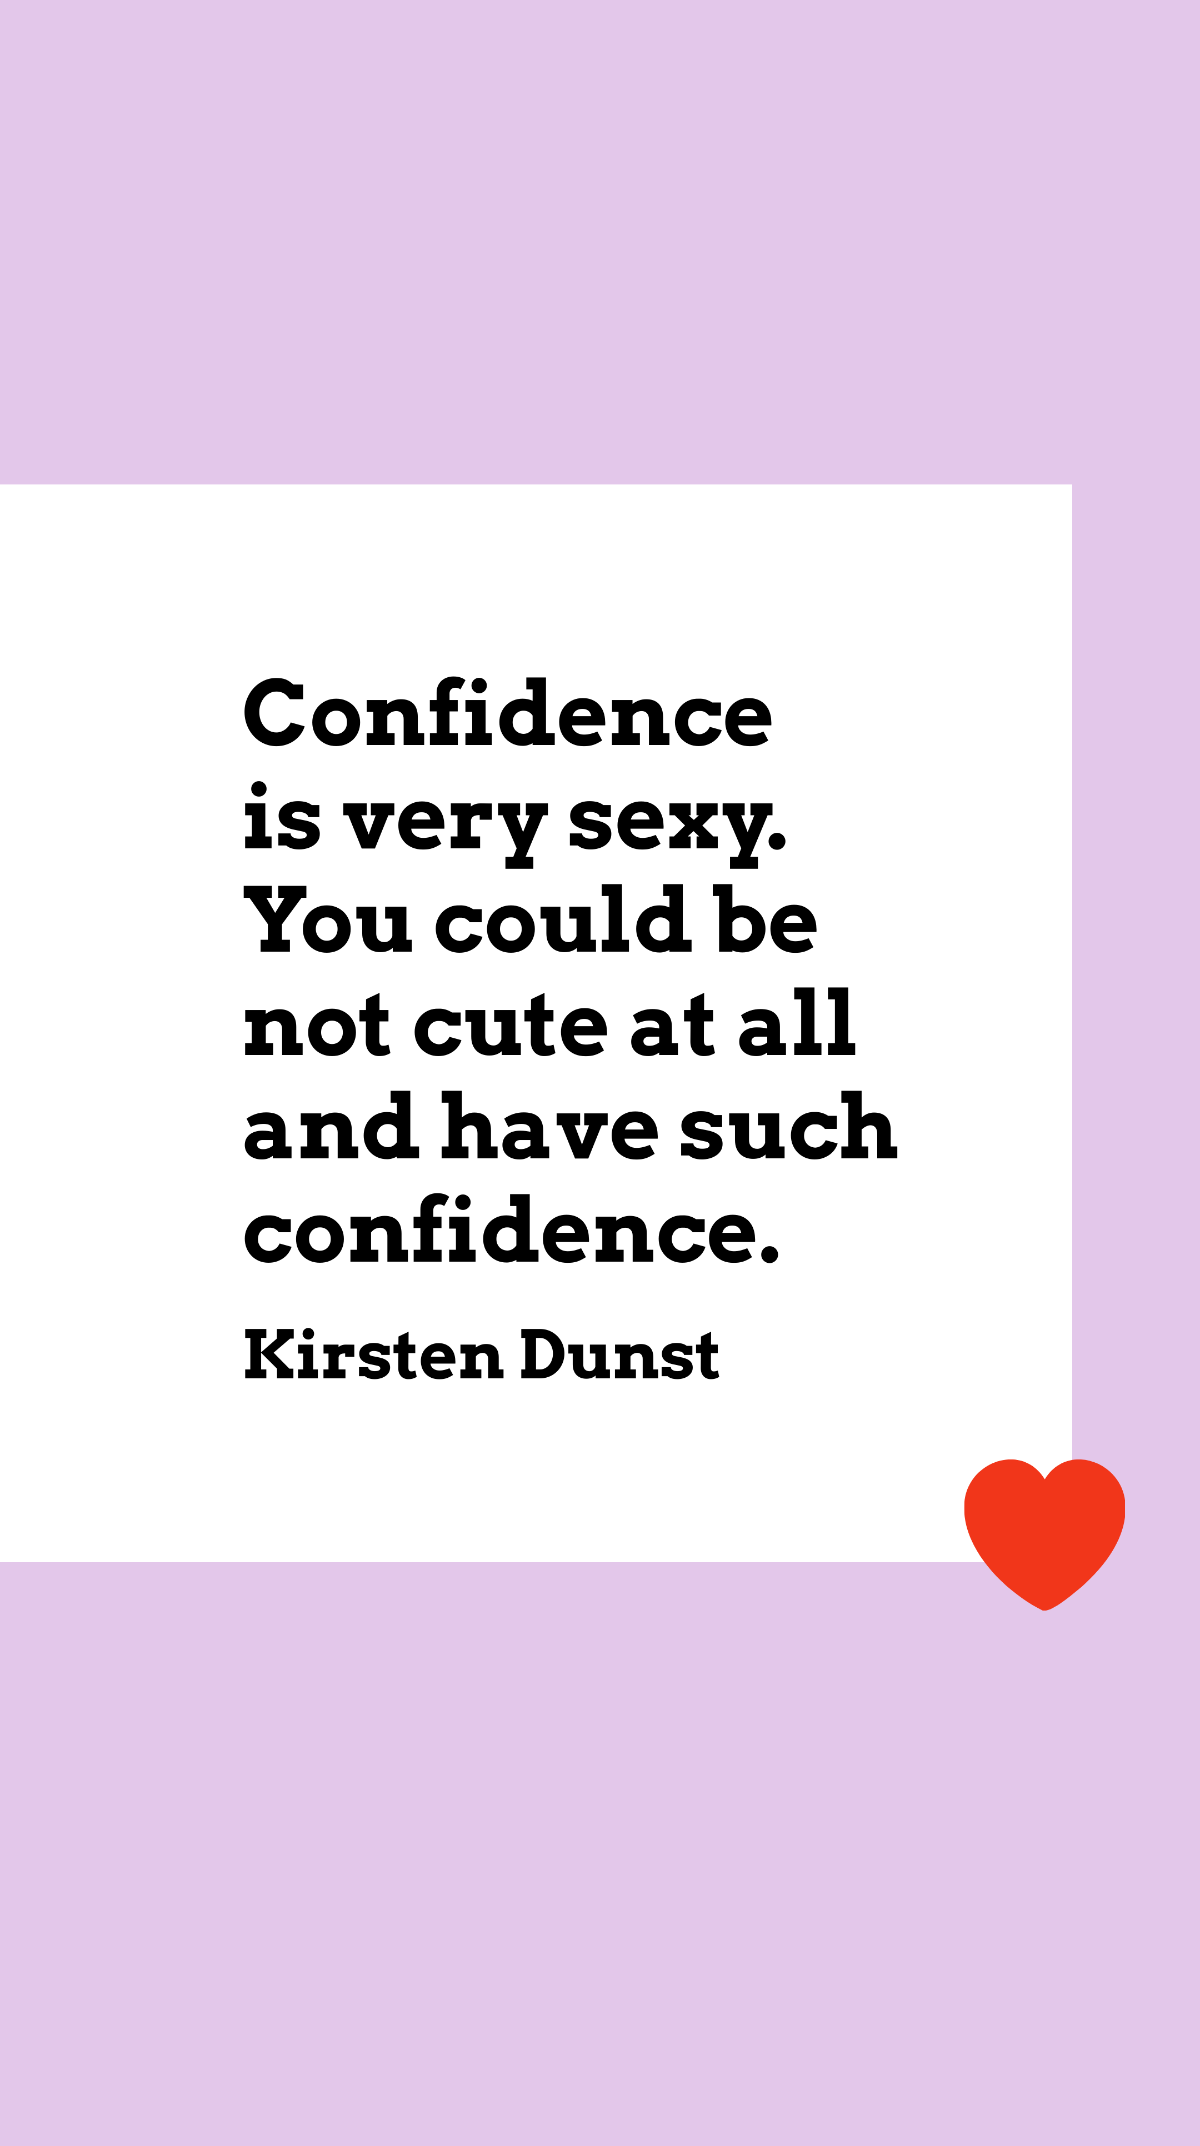 Kirsten Dunst - Confidence is very sexy. You could be not cute at all and have such confidence. Template